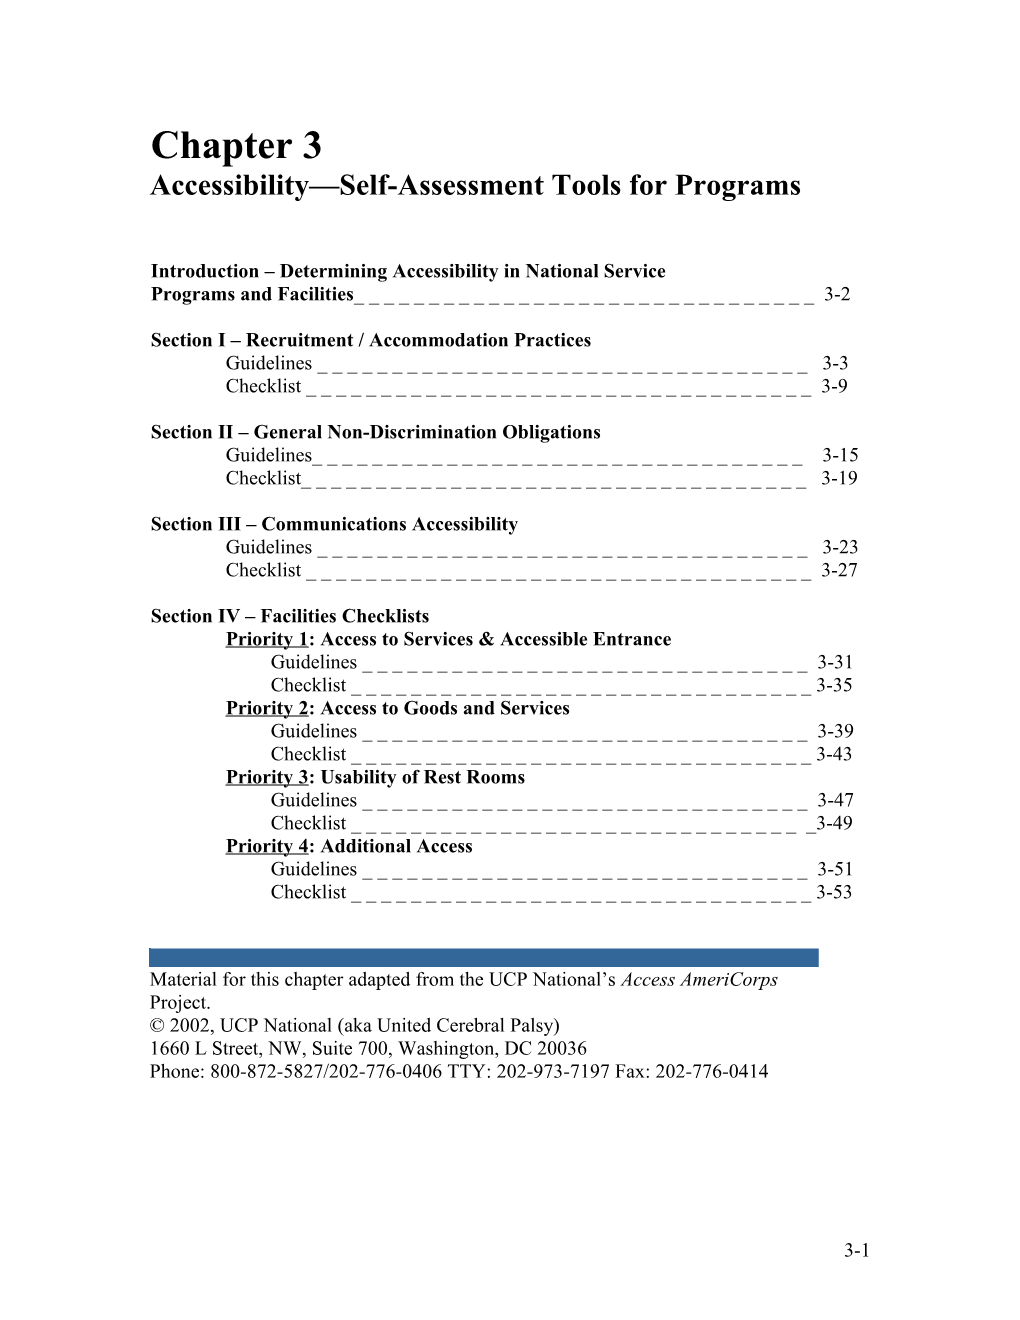 Determining Accessibility in Your Americorps Programs and Facilities Chapter Contents